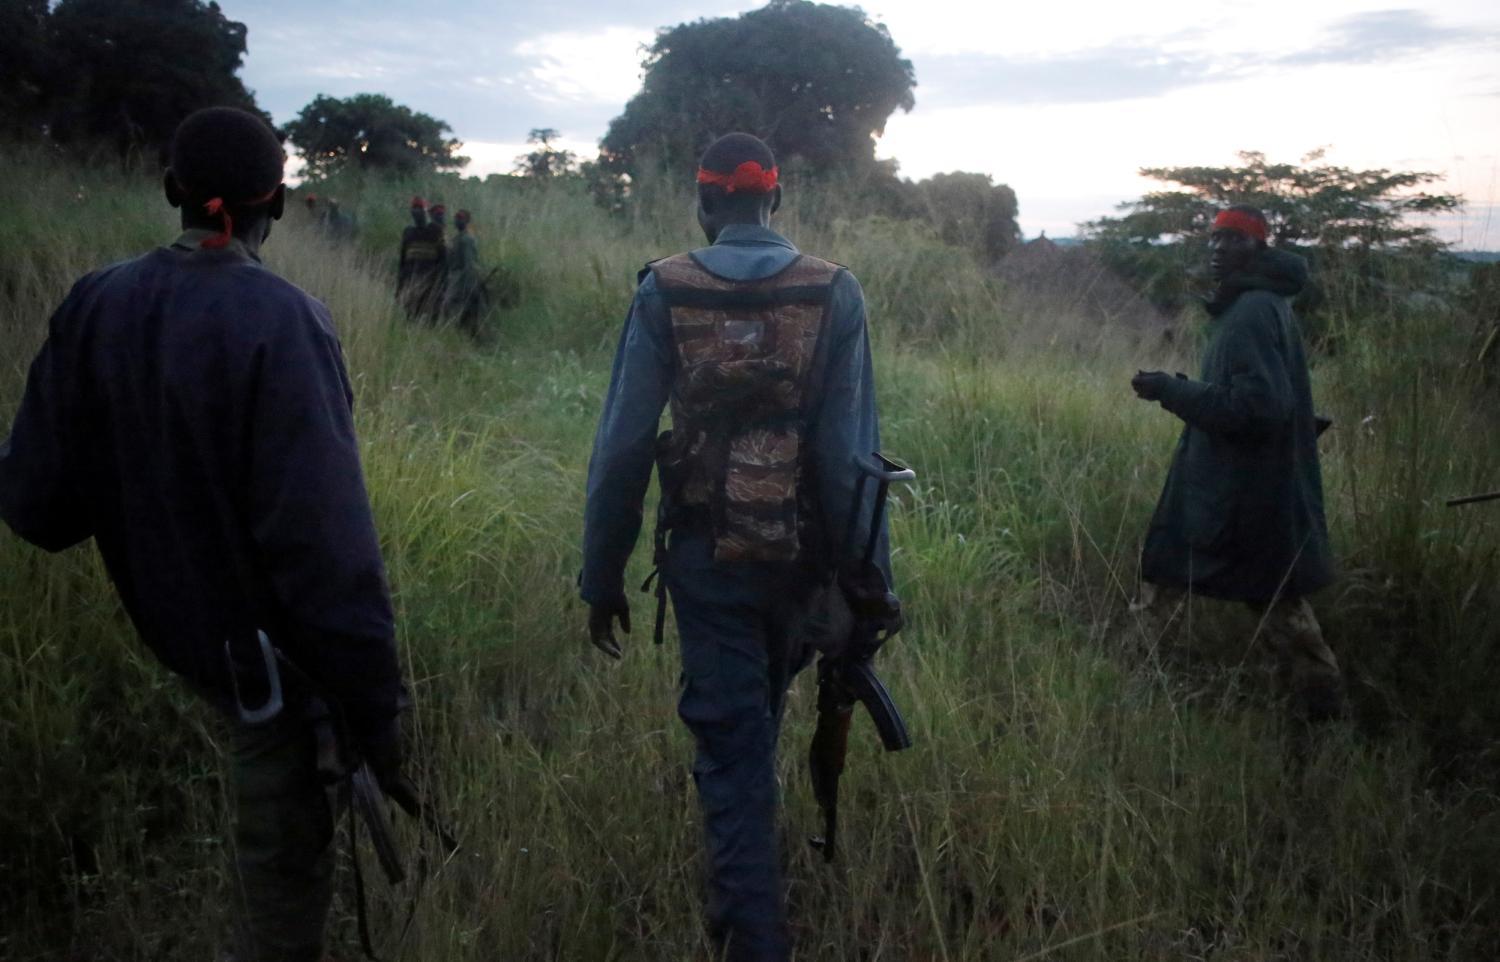 SPLA-IO rebels walk during an assault on government SPLA soldiers in the town of Kaya, on the border with Uganda